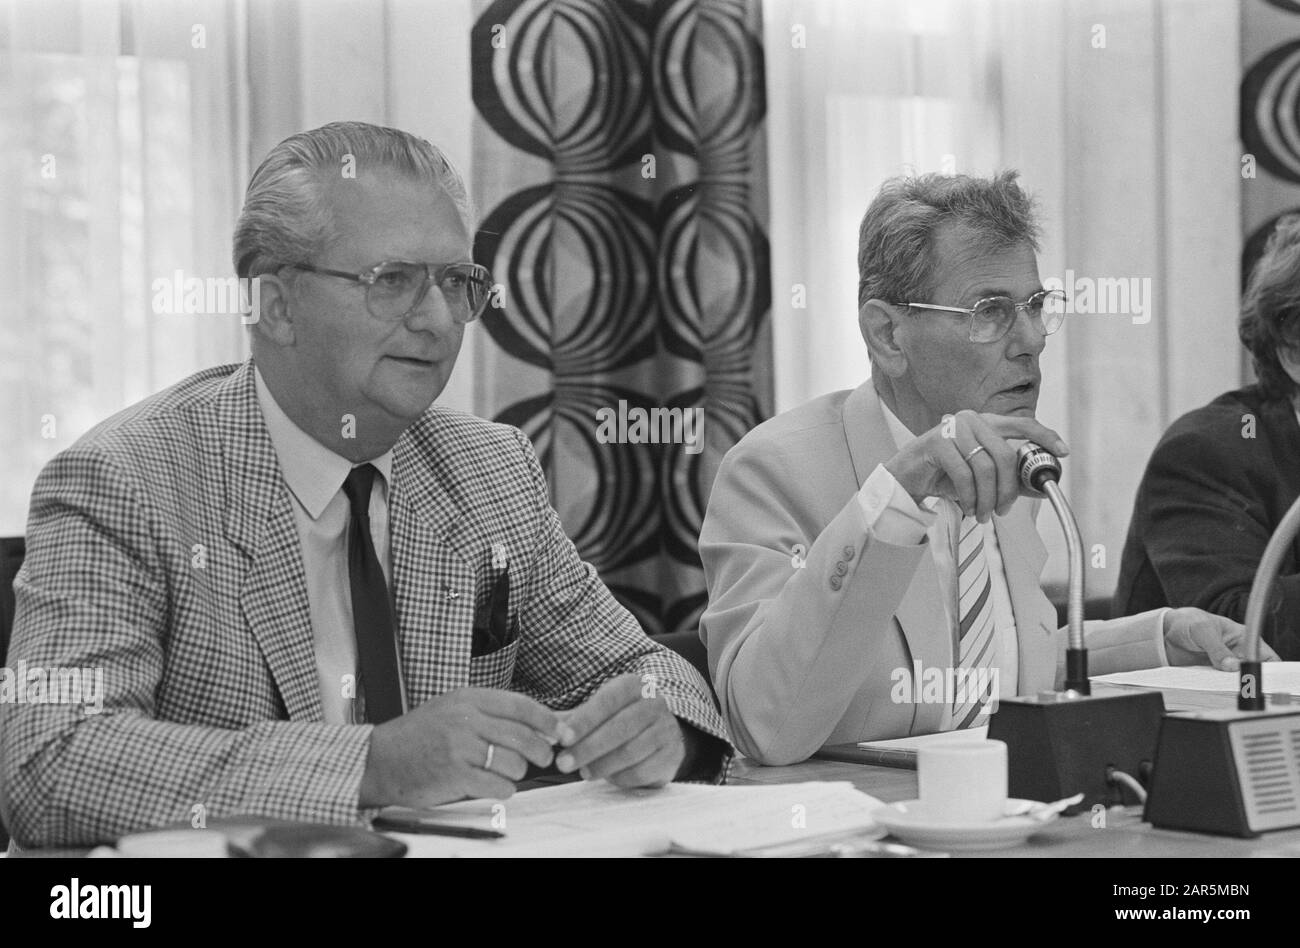 Kamercie. Civil service affairs hear civil service organisations about working conditions policy; CFO Chairman De Jong (l) and Abva/Kabo Vice-President Sanneveld (r)/Date: 1 September 1987 Keywords: Chamber committees, Vice-Chairmen Personal name: CFO-Chairman Institution name: ABVAKabo Stock Photo